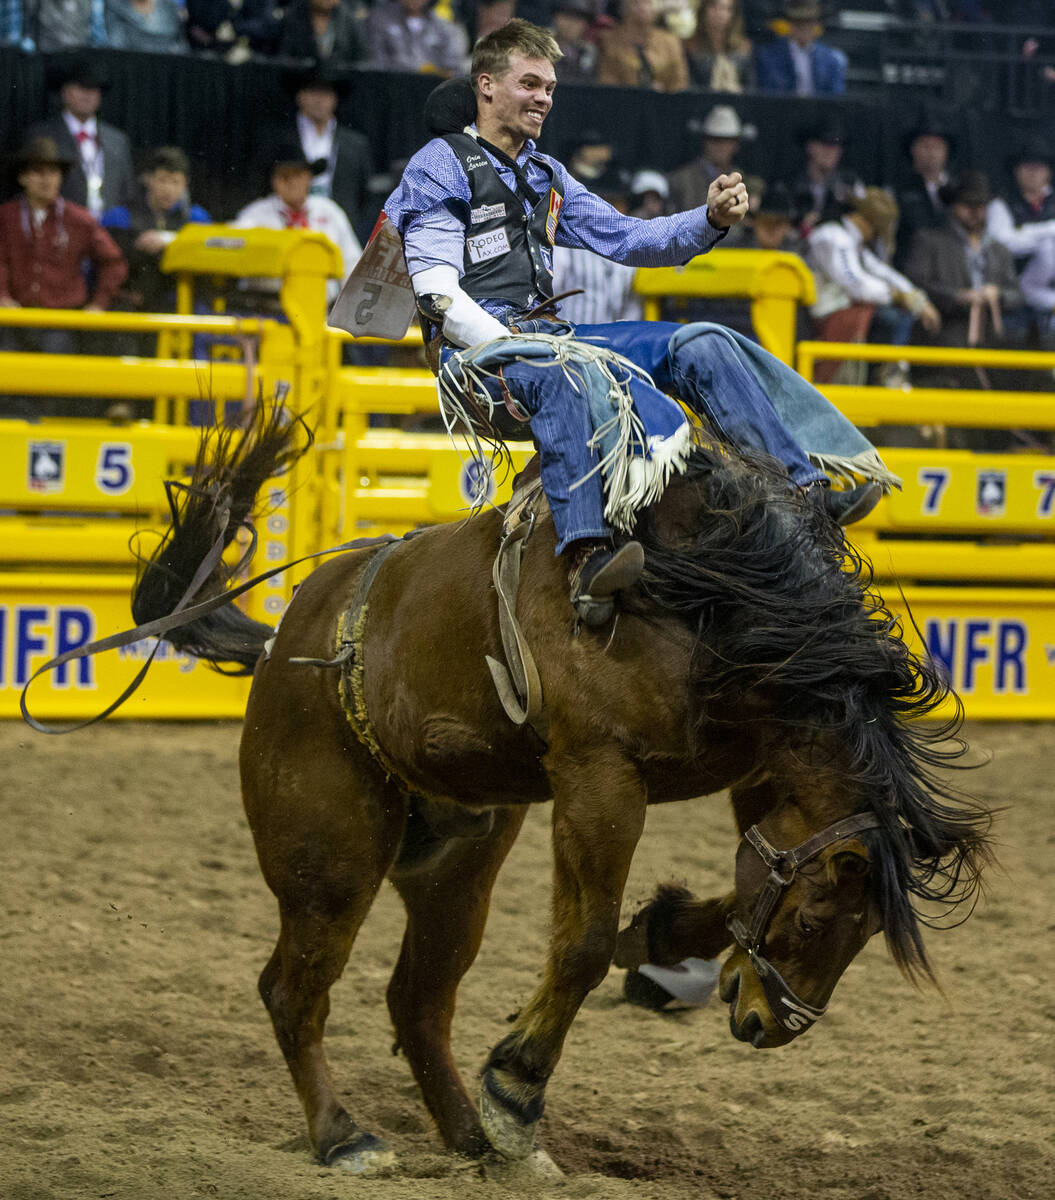 Orin Larsen of Inglis, Manitoba, catches some air in Bareback Riding during the tenth go round ...